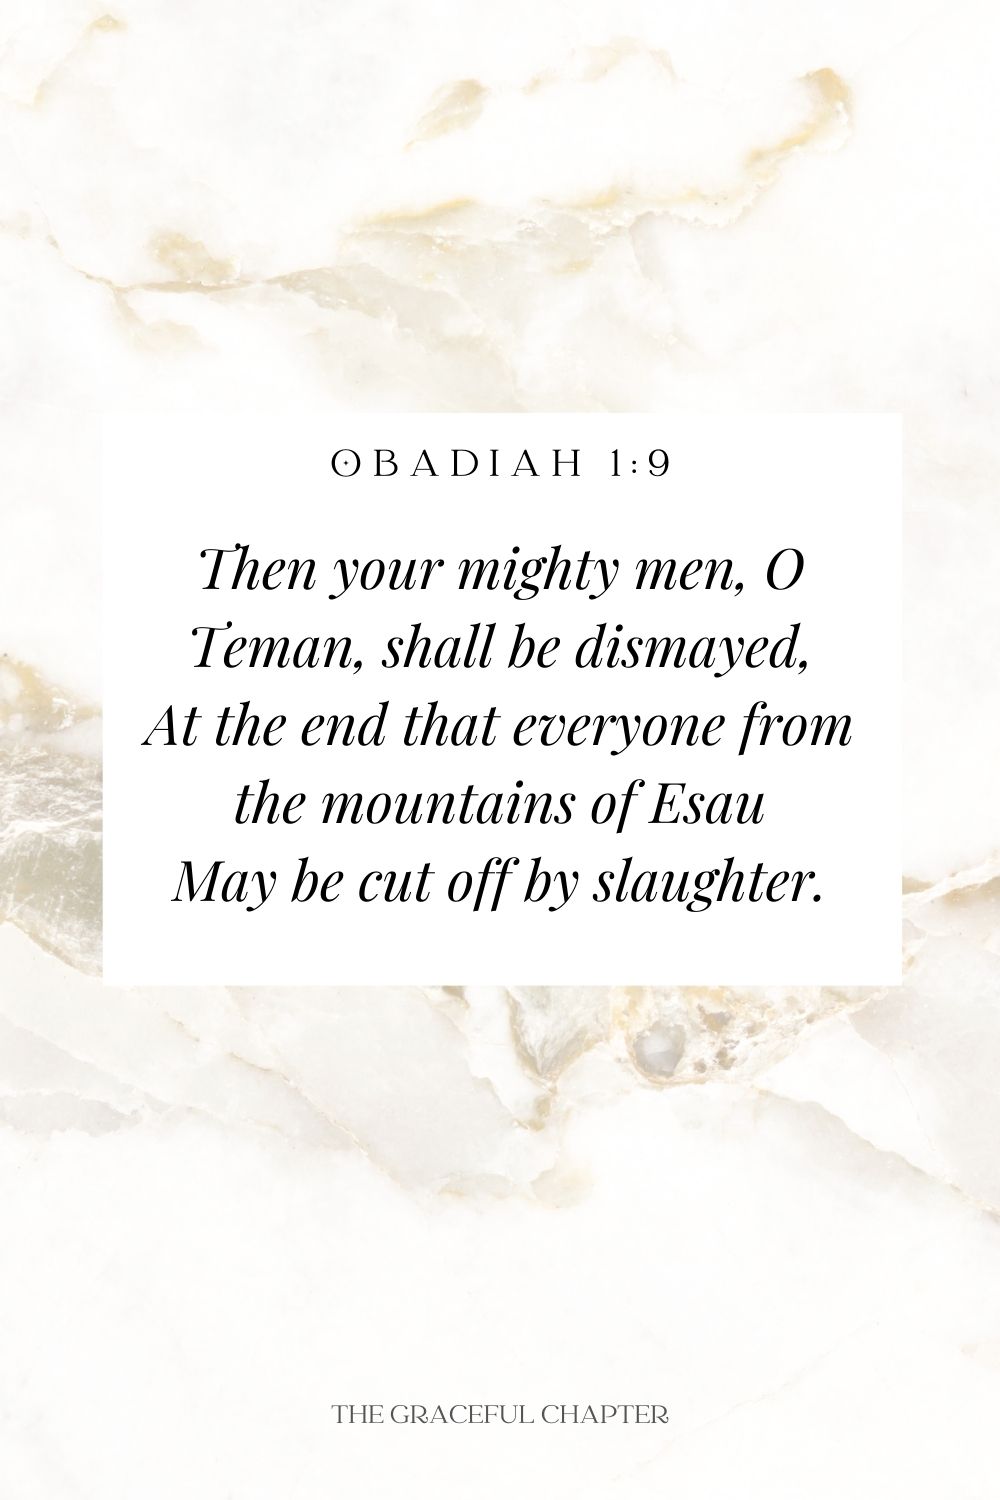 Then your mighty men, O Teman, shall be dismayed, In the end that everyone from the mountains of Esau May be cut off by slaughter. Obadiah 1:9